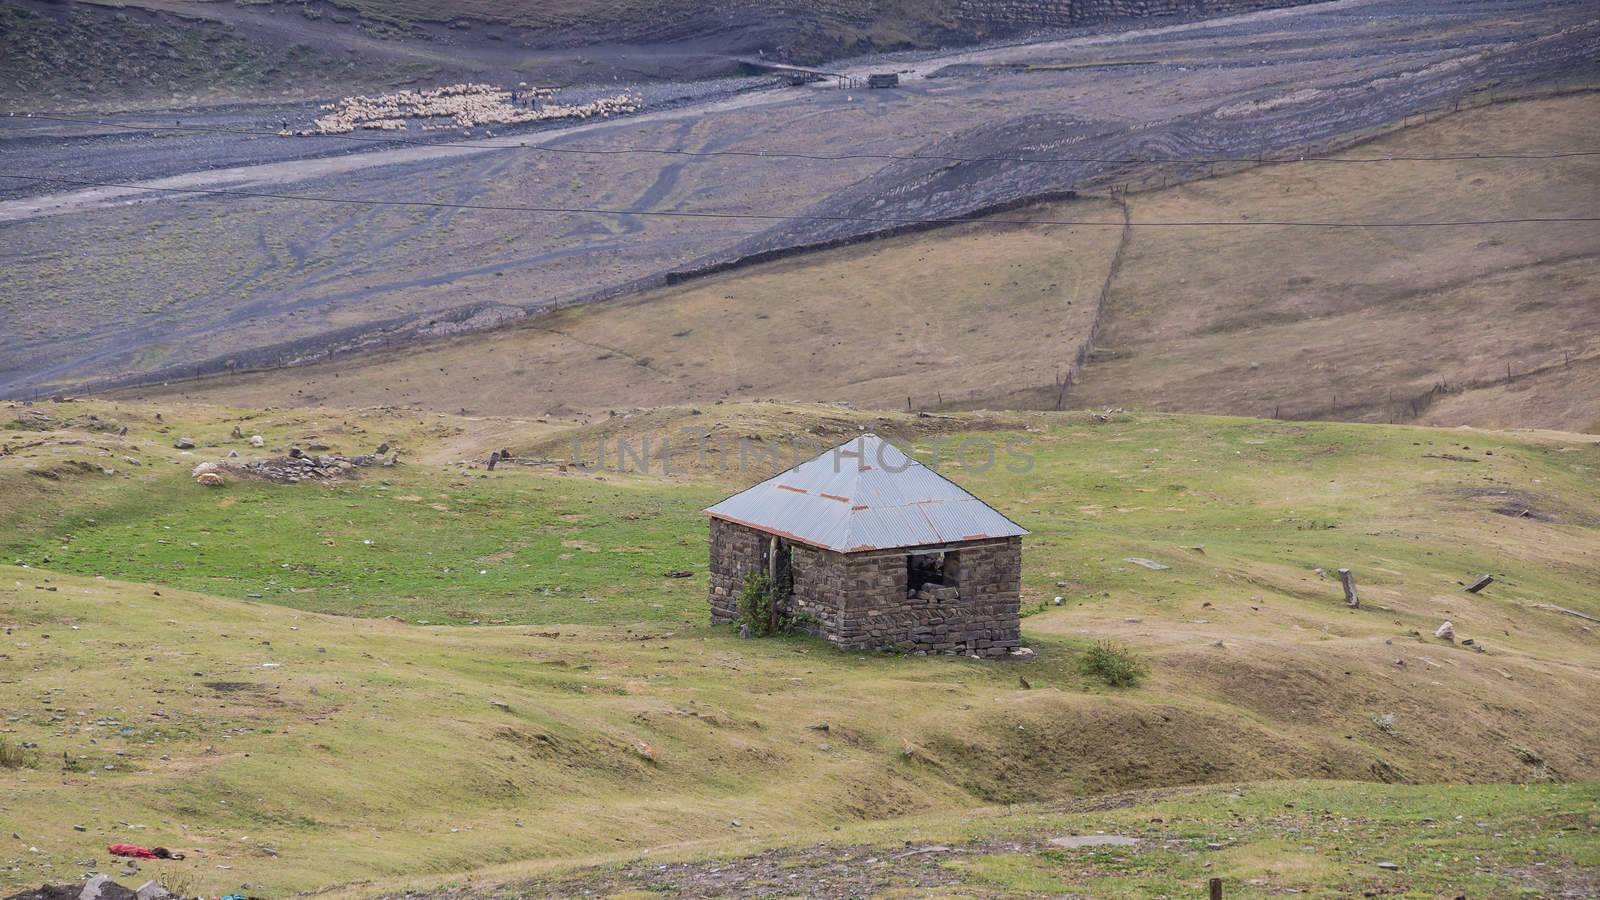 The shepherd's hut on the background of the river and a flock of sheeps in the distance in Great Caucasus Mountains, Azerbaijan.